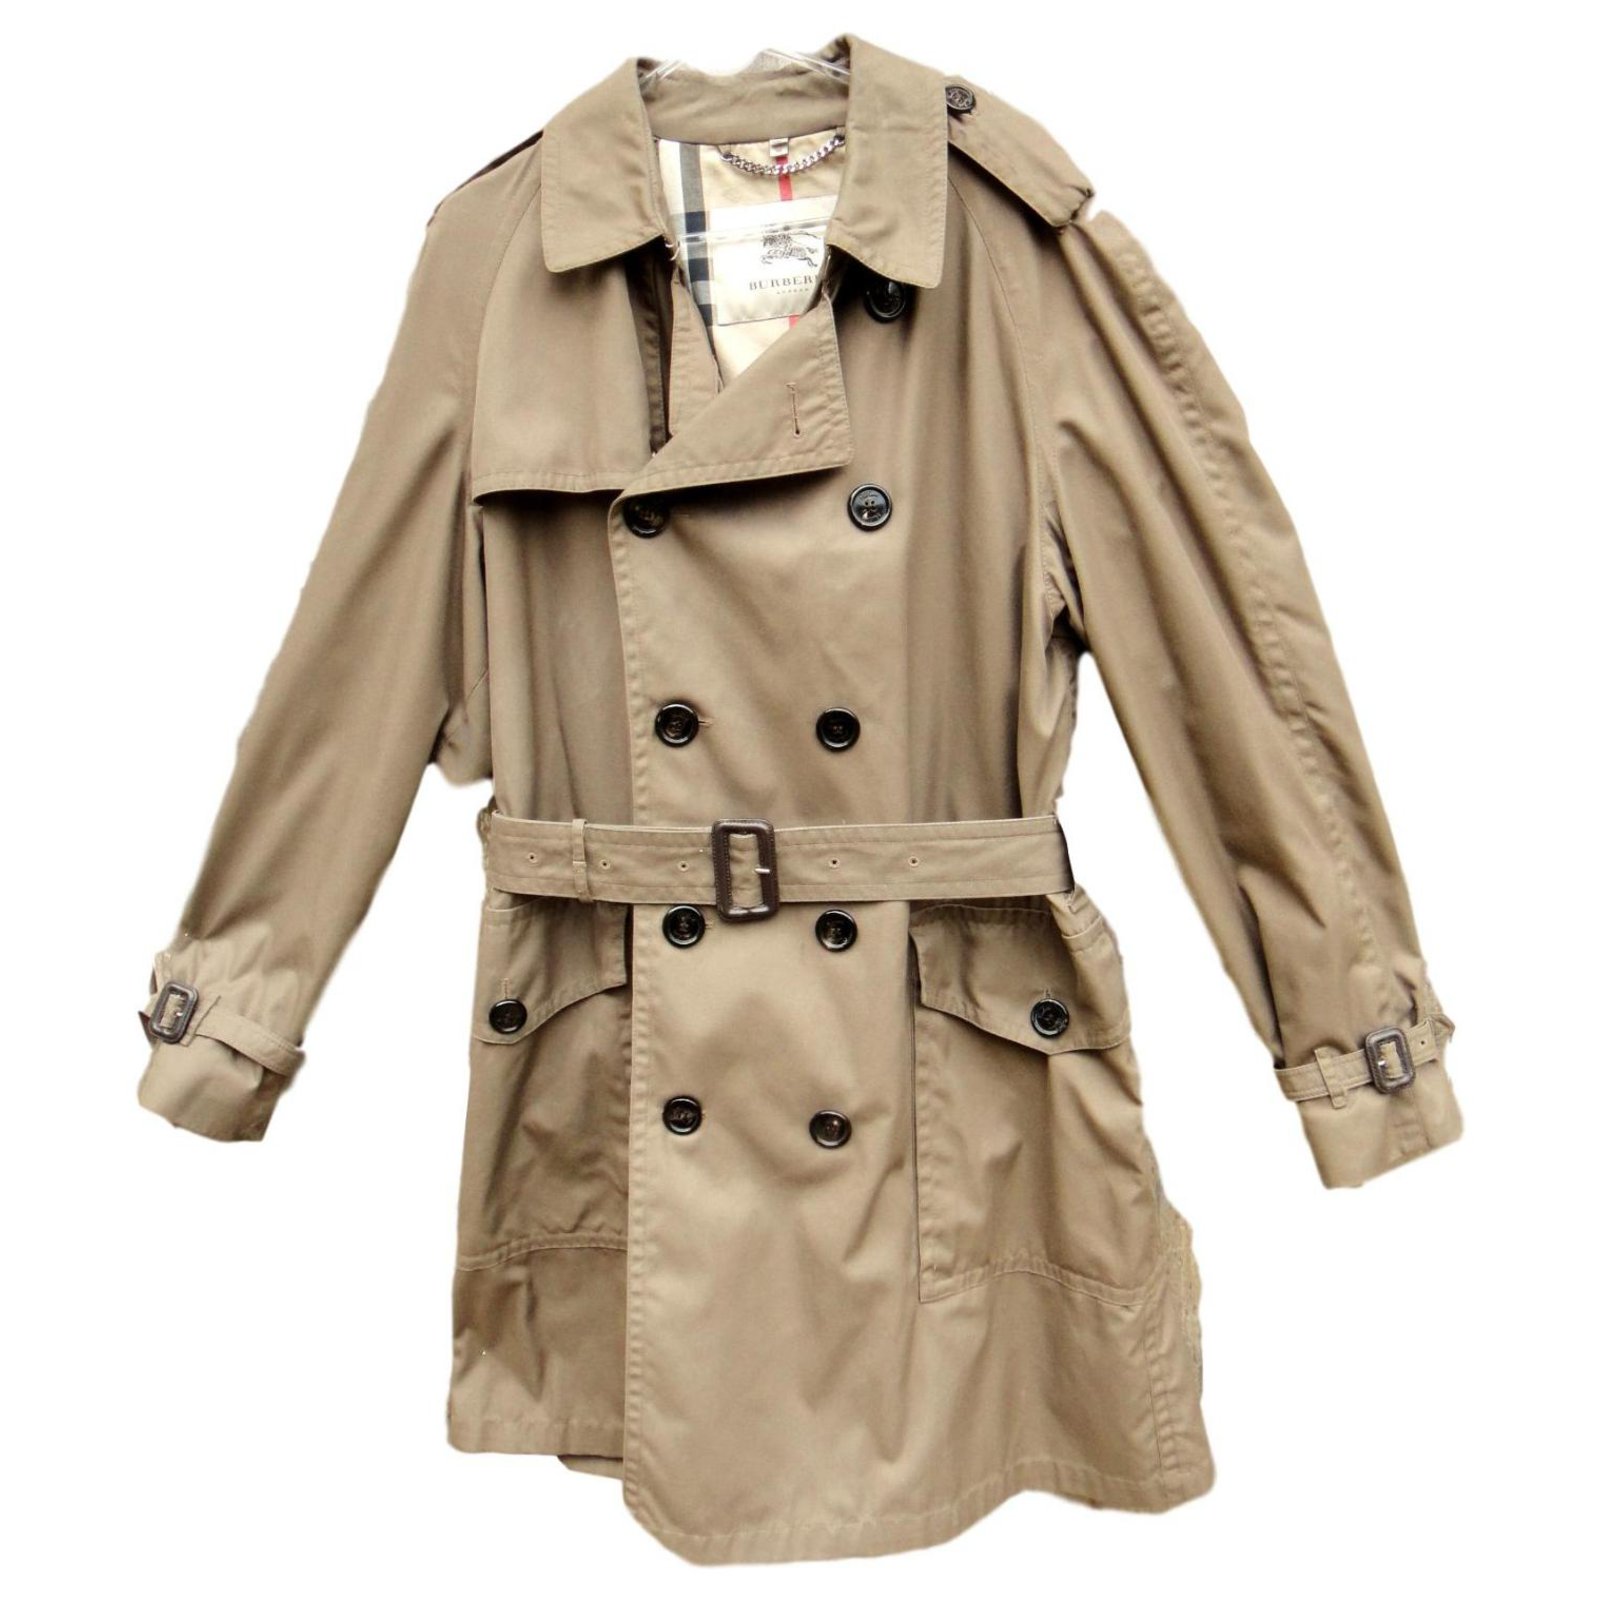 Burberry burberry london t trench coat 